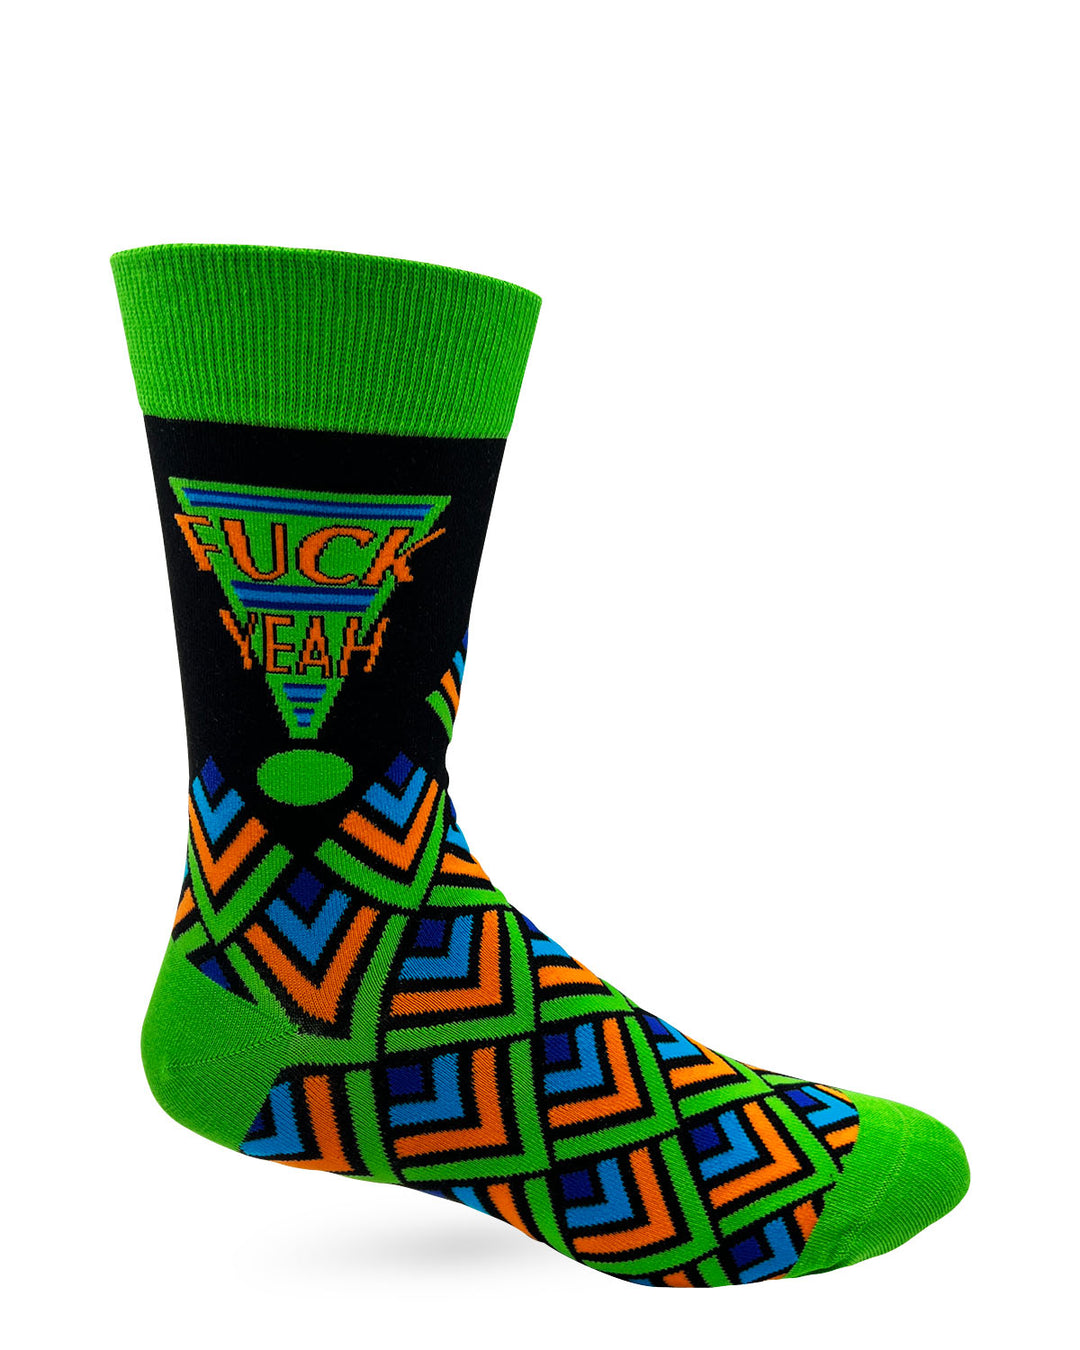 Fuck Yeah Men's Novelty Crew Socks in Lime Green and Black